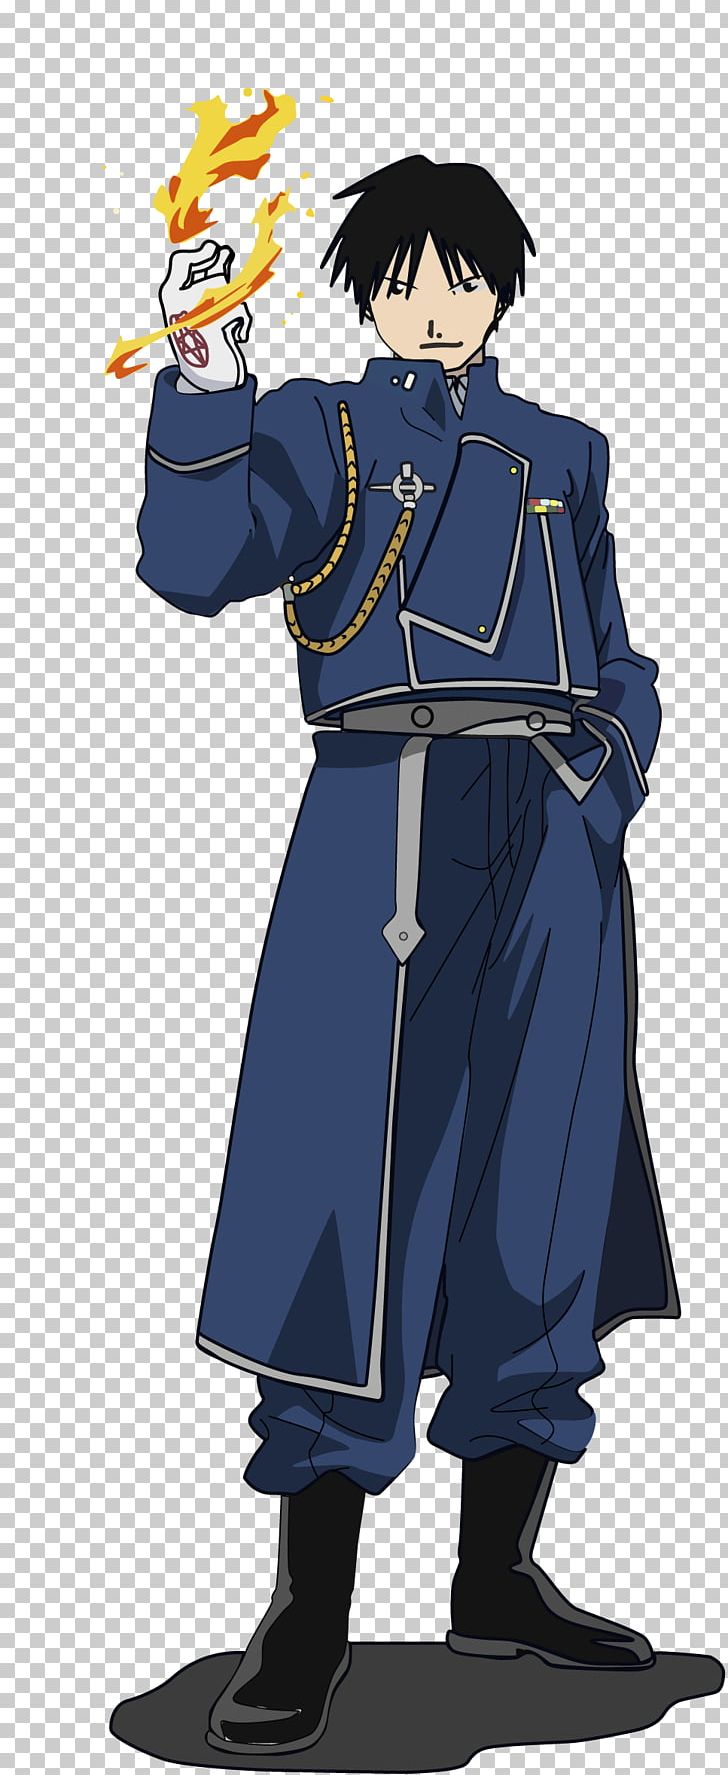 Roy Mustang Fullmetal Alchemist Anime Character Fan Art PNG, Clipart, Animation, Anime, Cartoon, Character, Clothing Free PNG Download